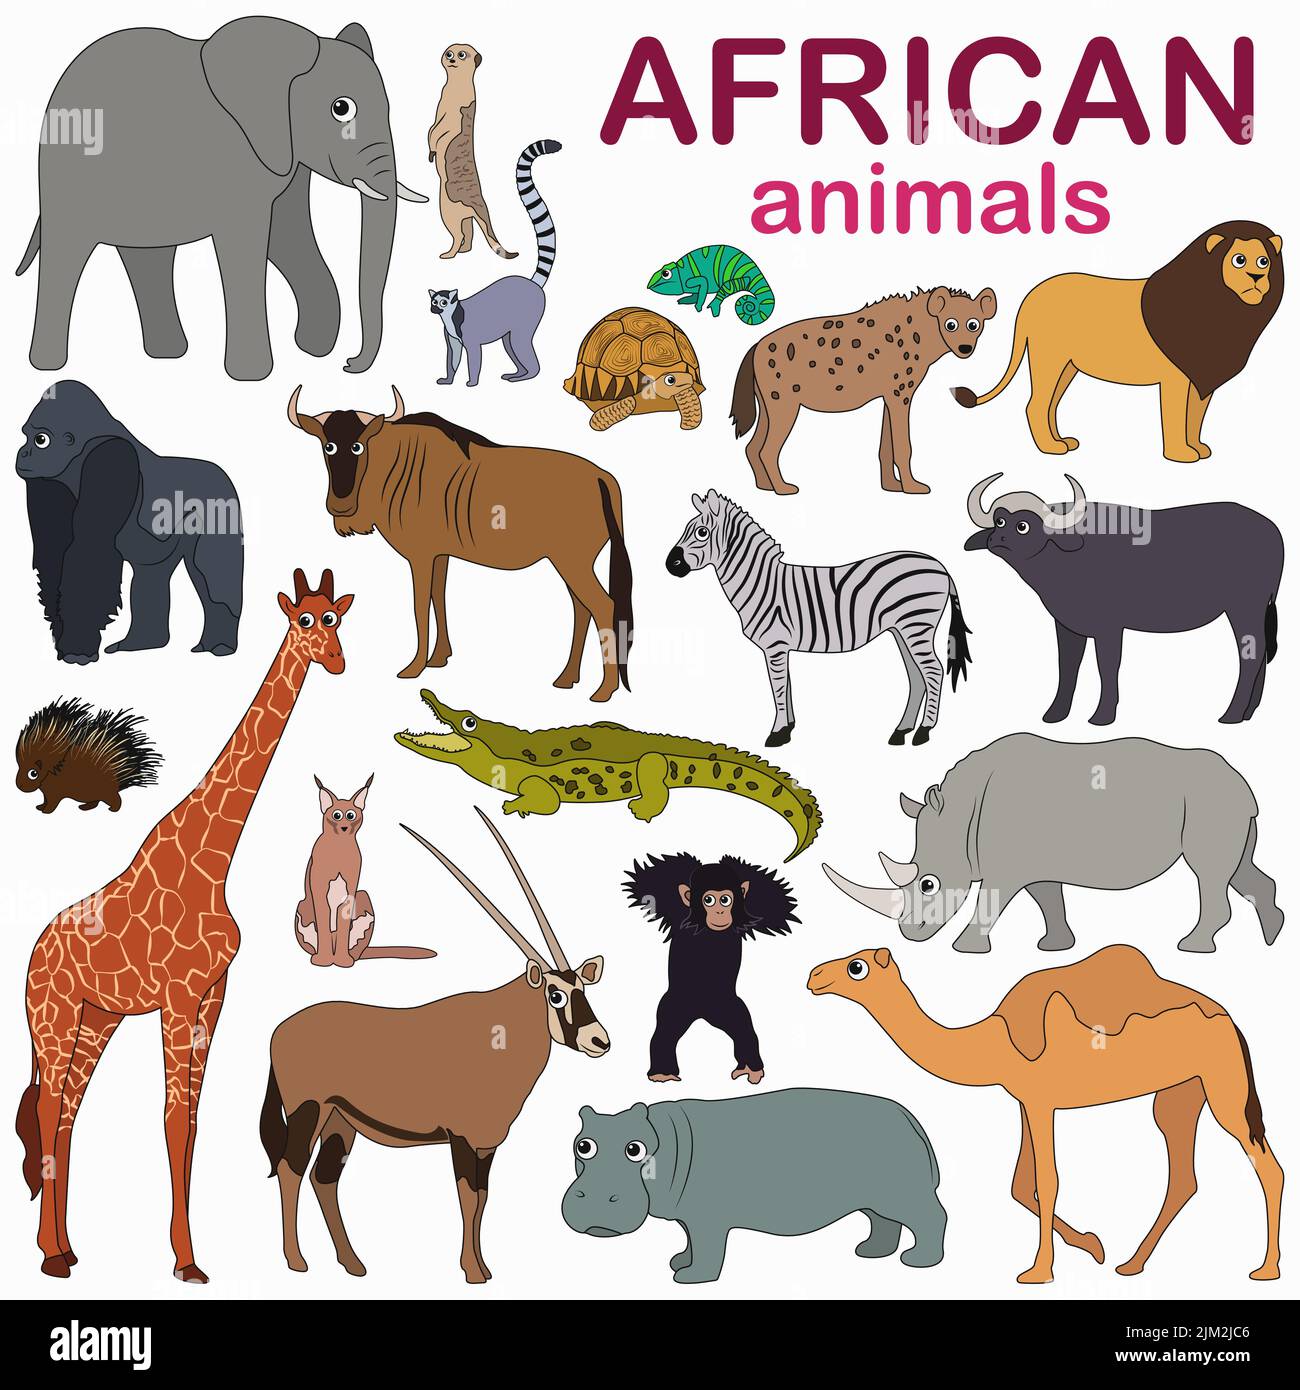 Big collection of cute cartoon african animals. Stock Vector